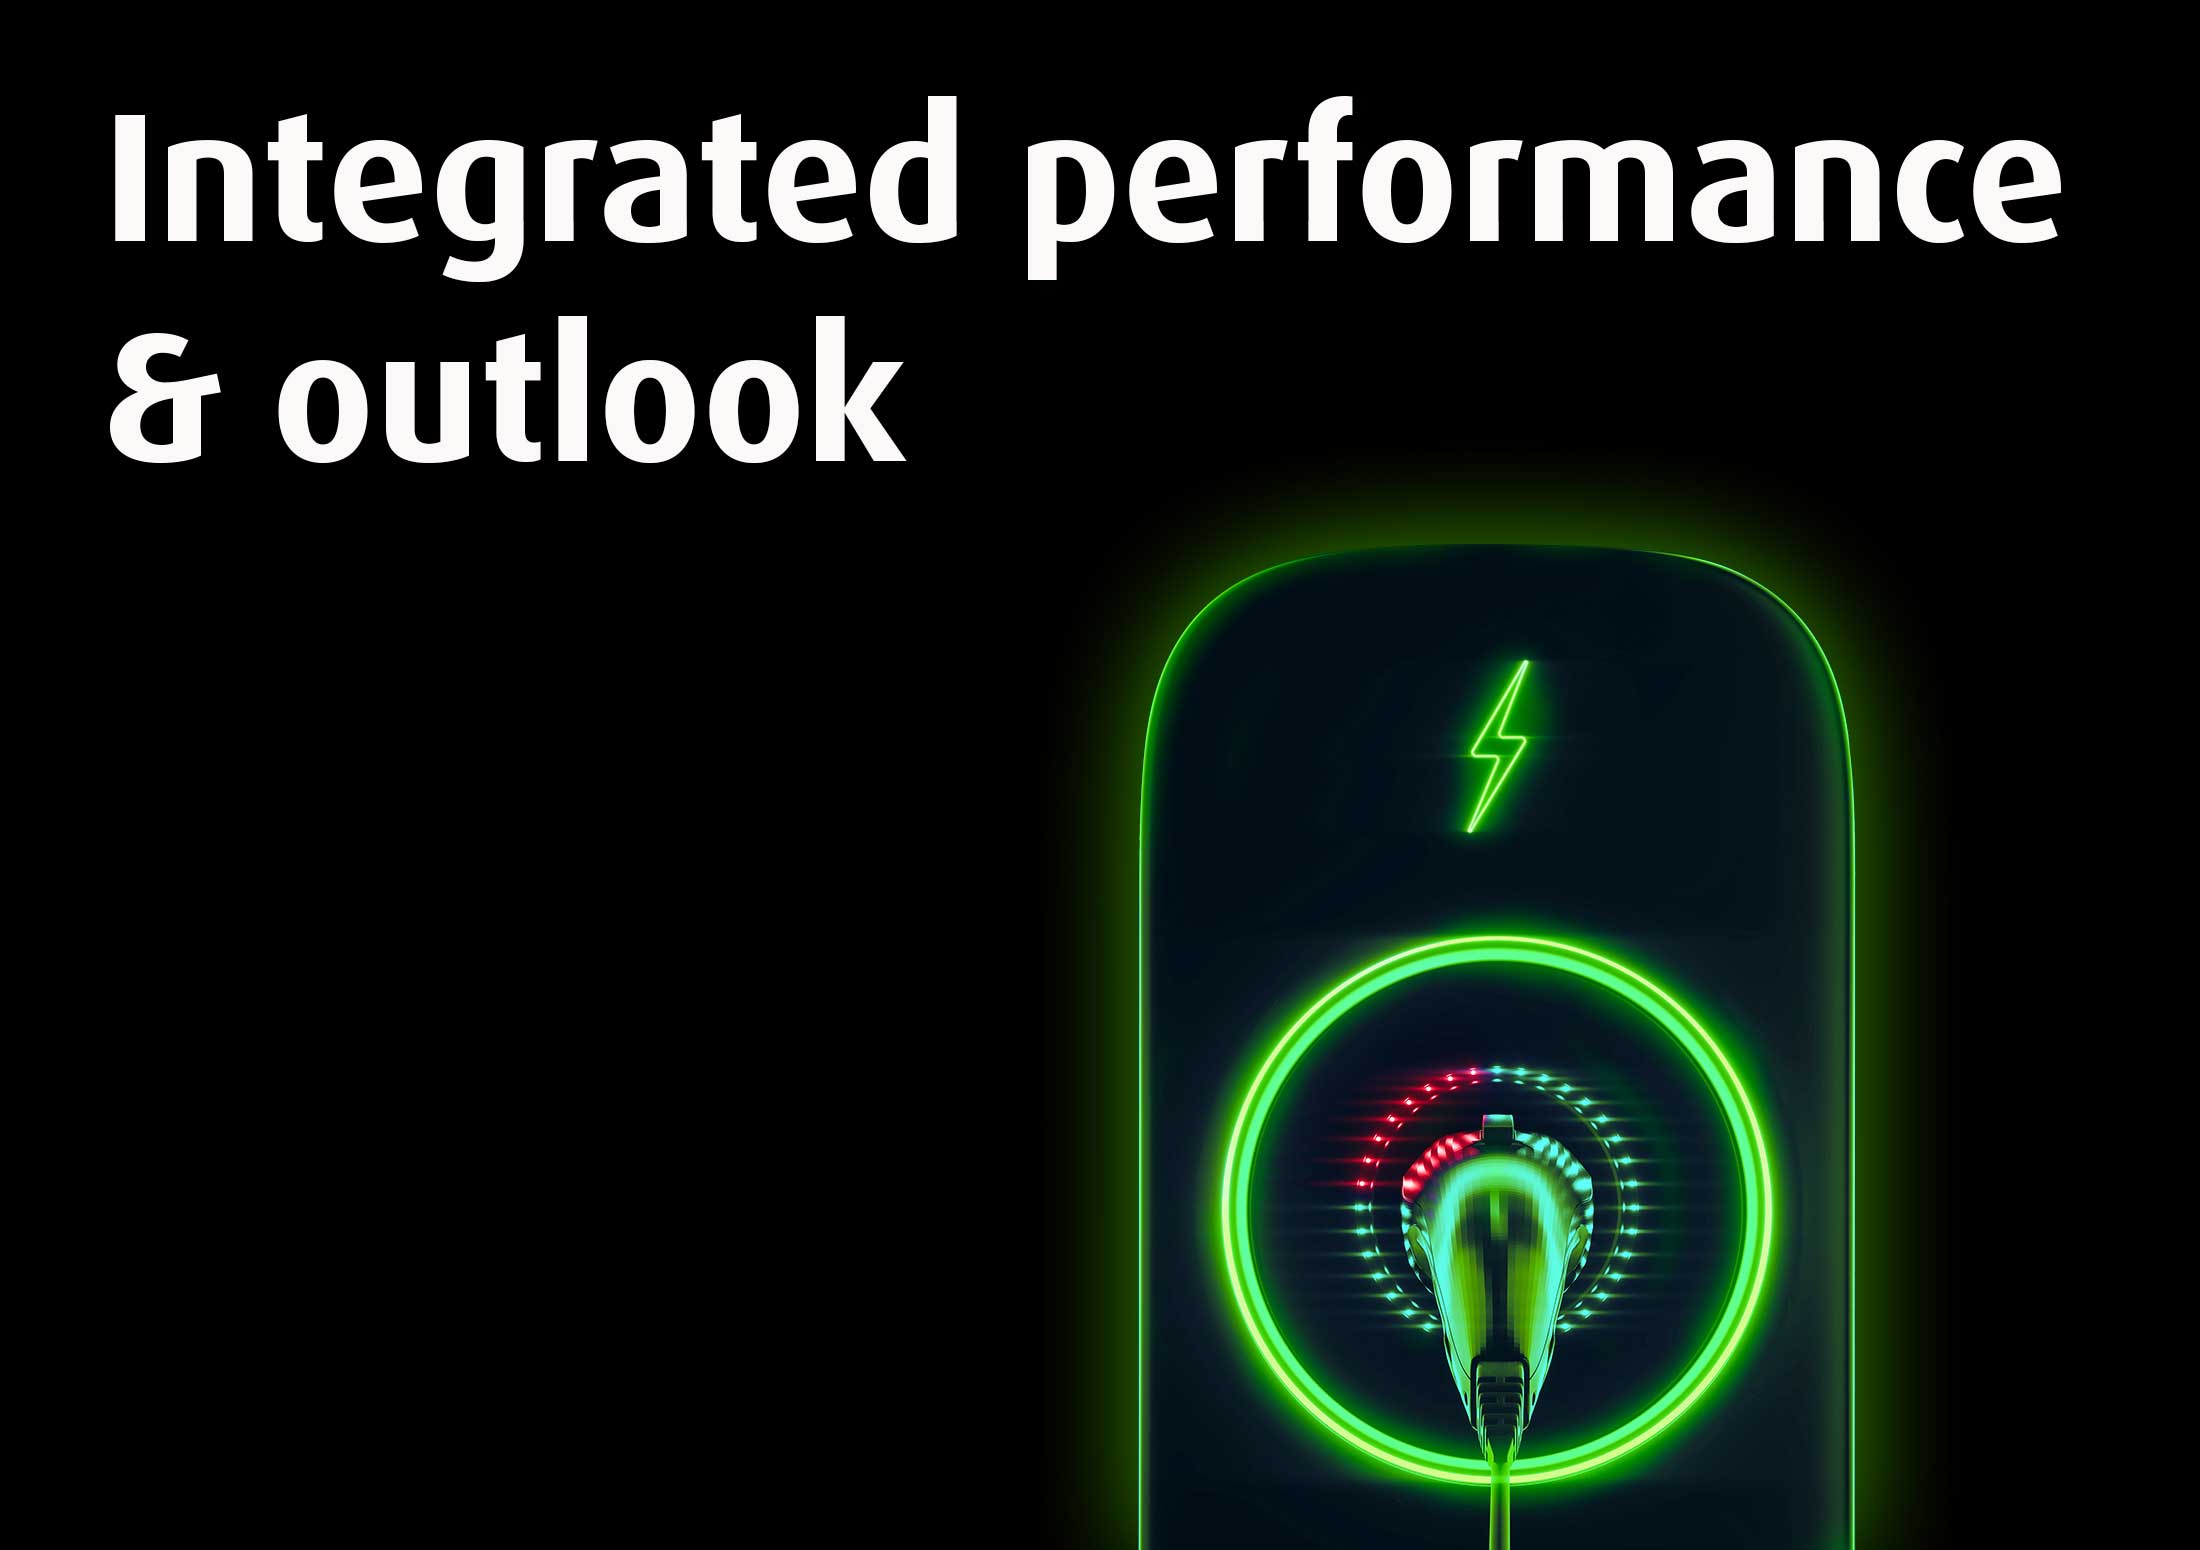 Integrated performance & outlook, page 40